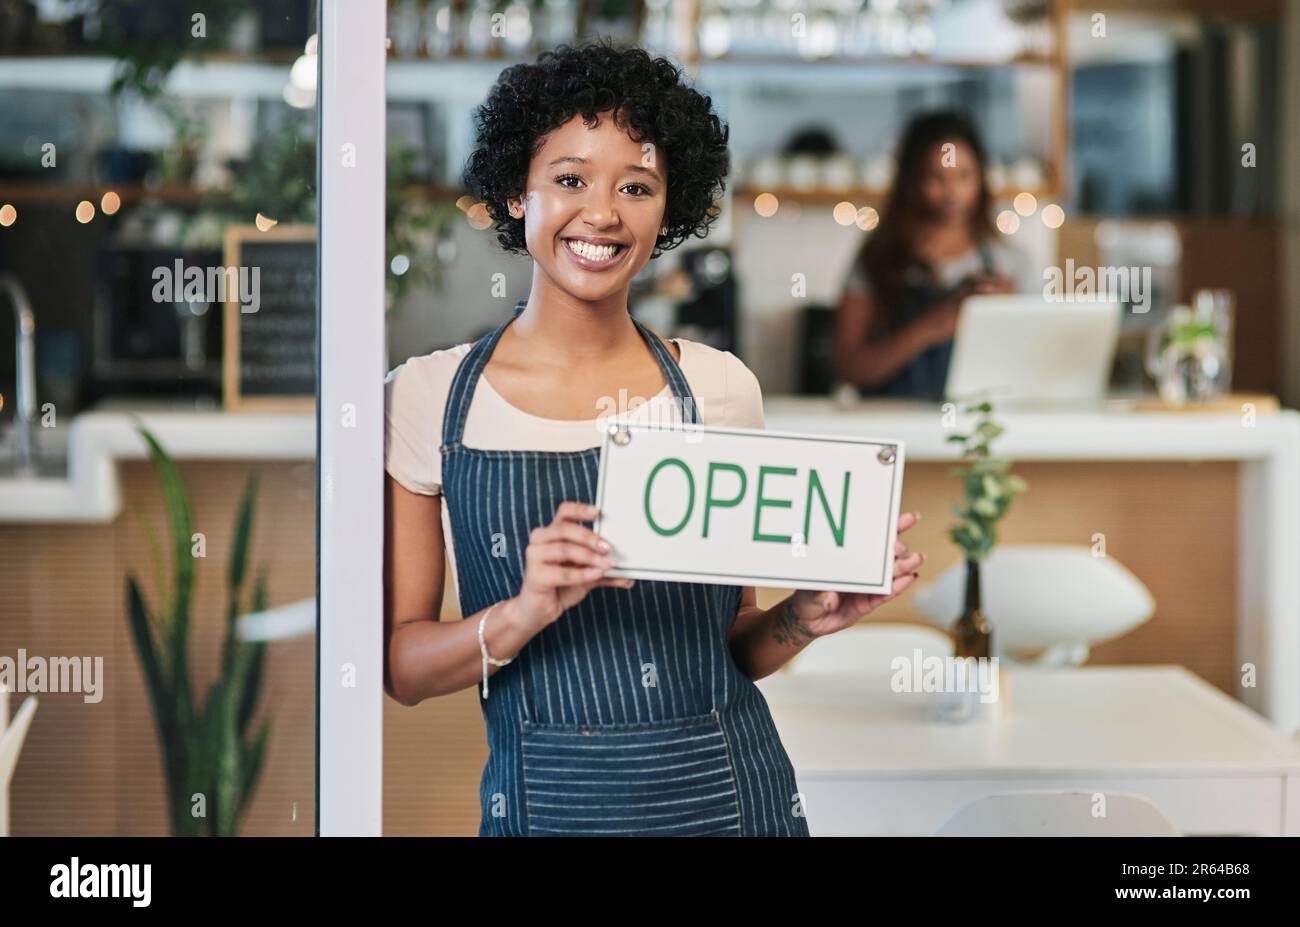 Happy woman, open sign and portrait at cafe of waitress or small business owner for morning or ready to serve. African female person at restaurant Stock Photo